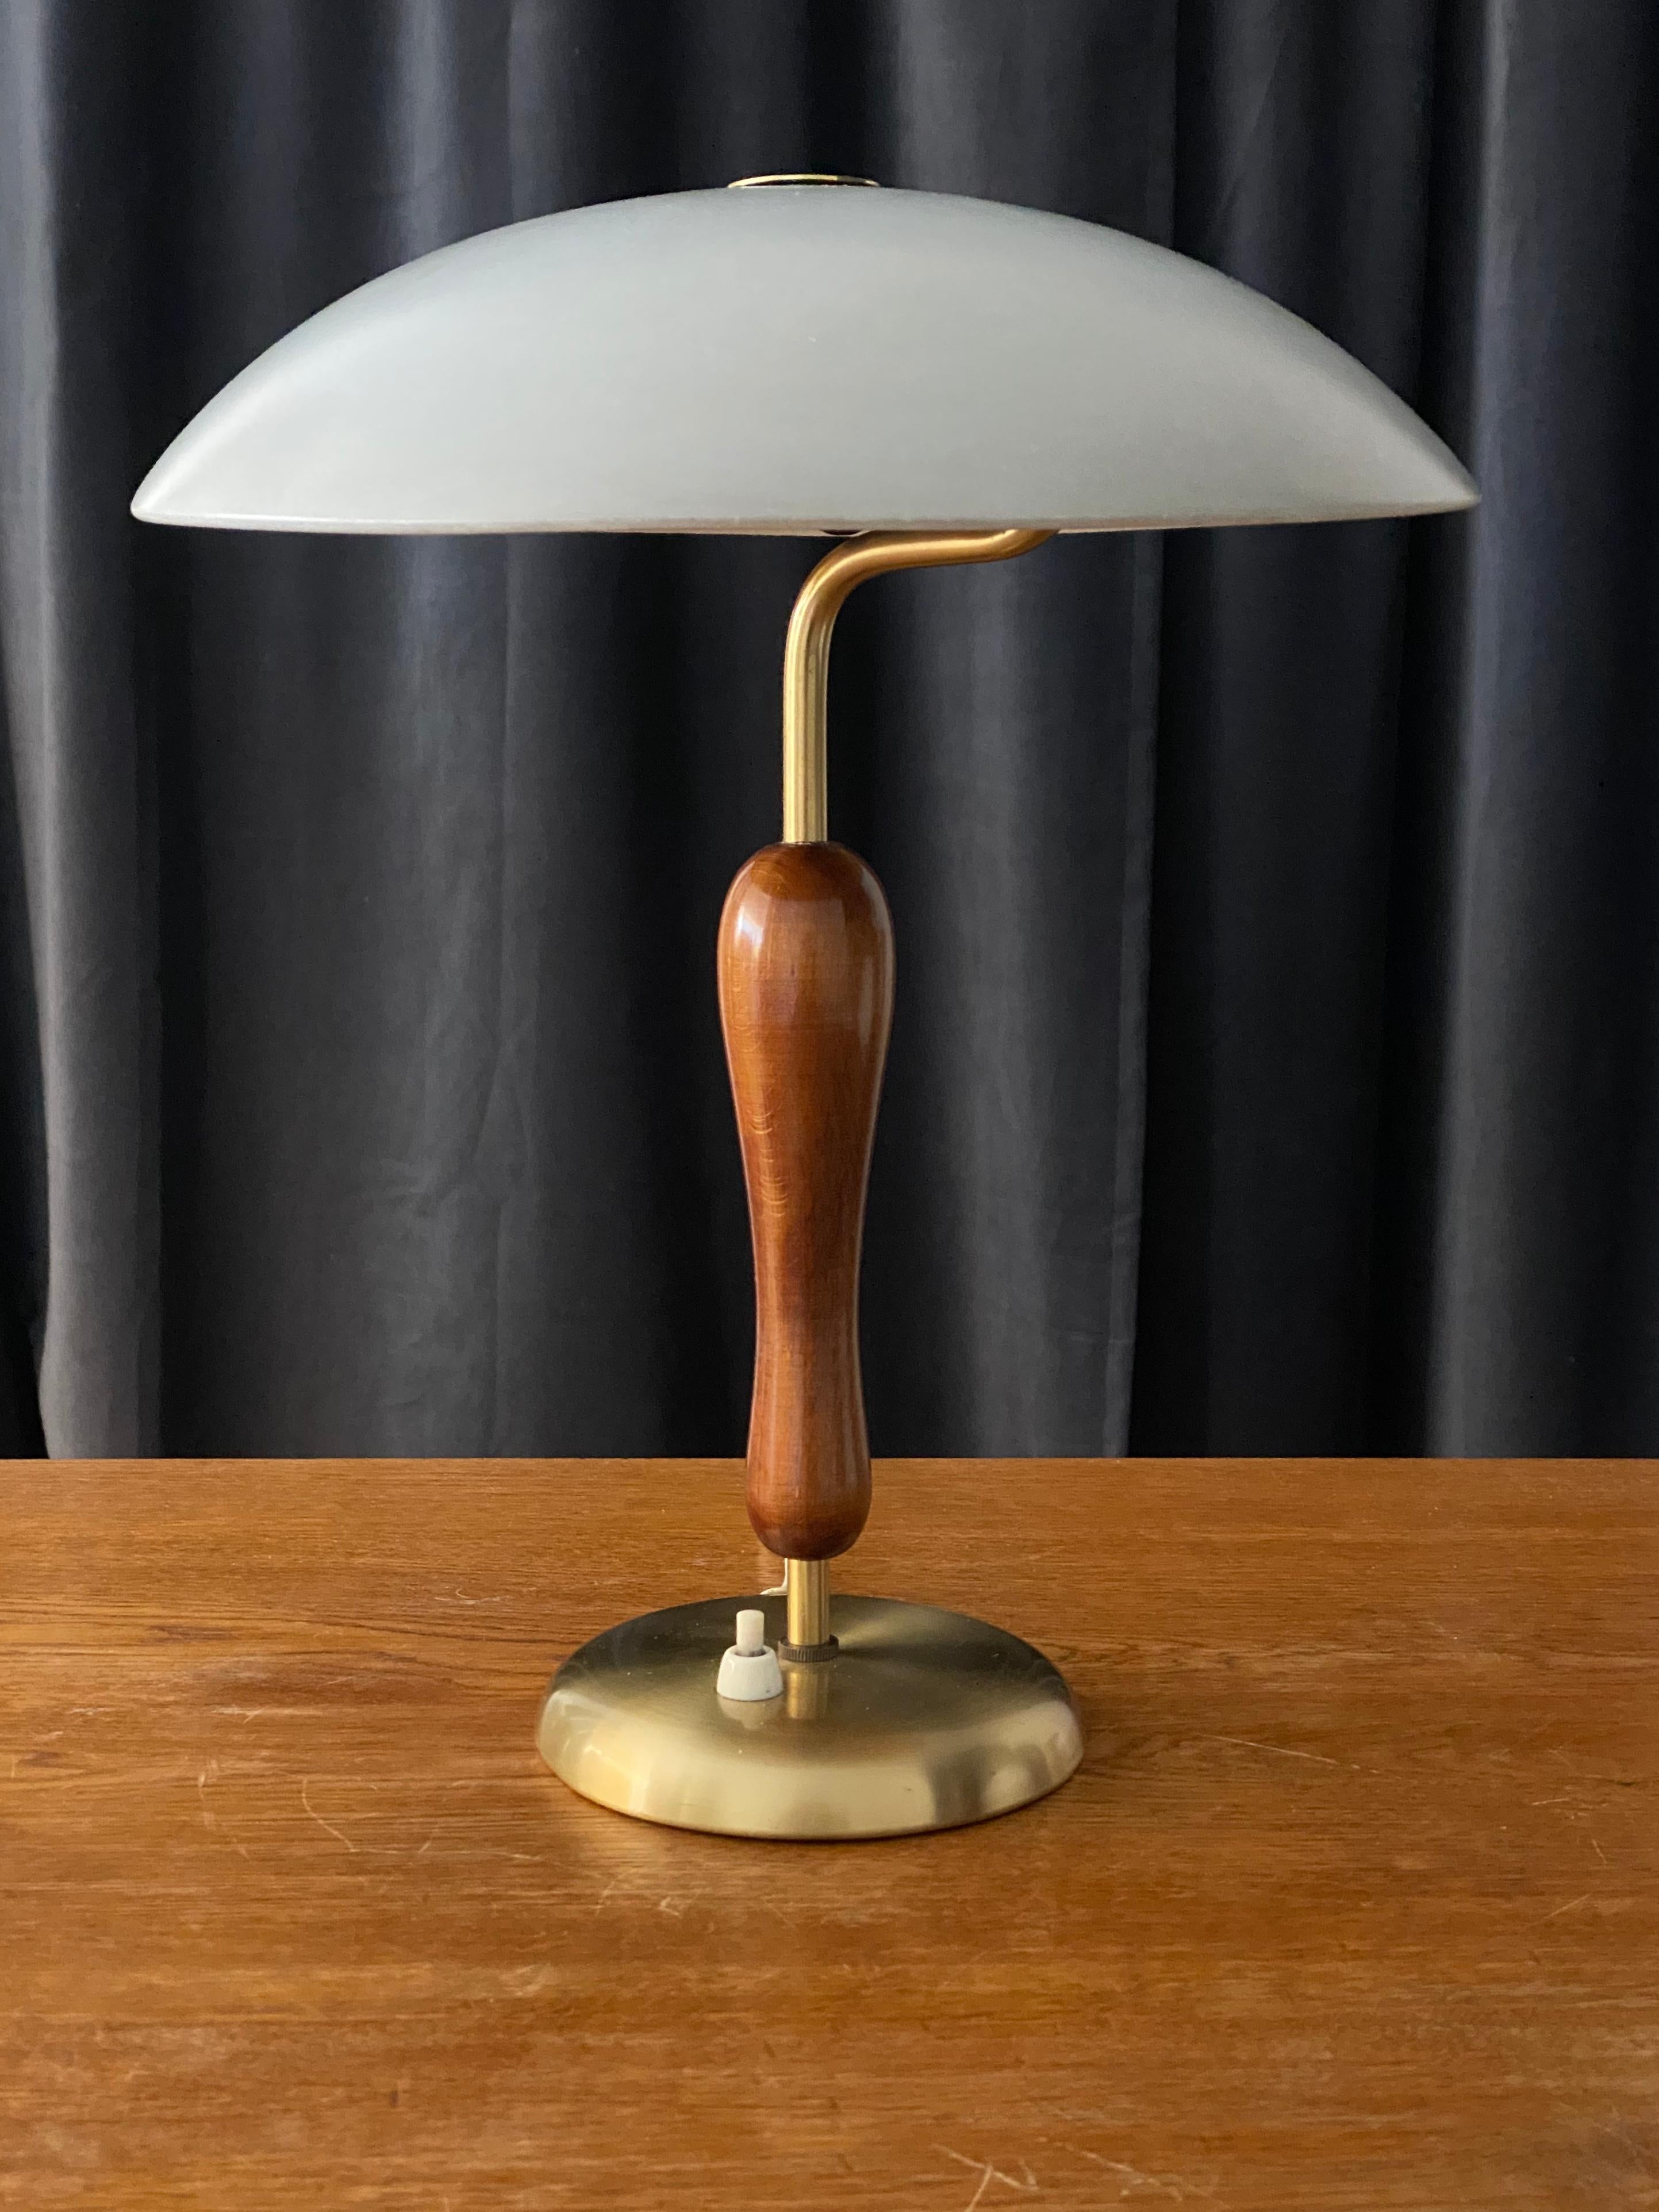 A modernist table lamp. Produced by Boréns, Borås, Sweden, late 1940s.

Features a finely sculpted lacquered wood handle on a brass rod and base, original lacquered metal screen.

Other designers of the period include Paavo Tynell, Lisa